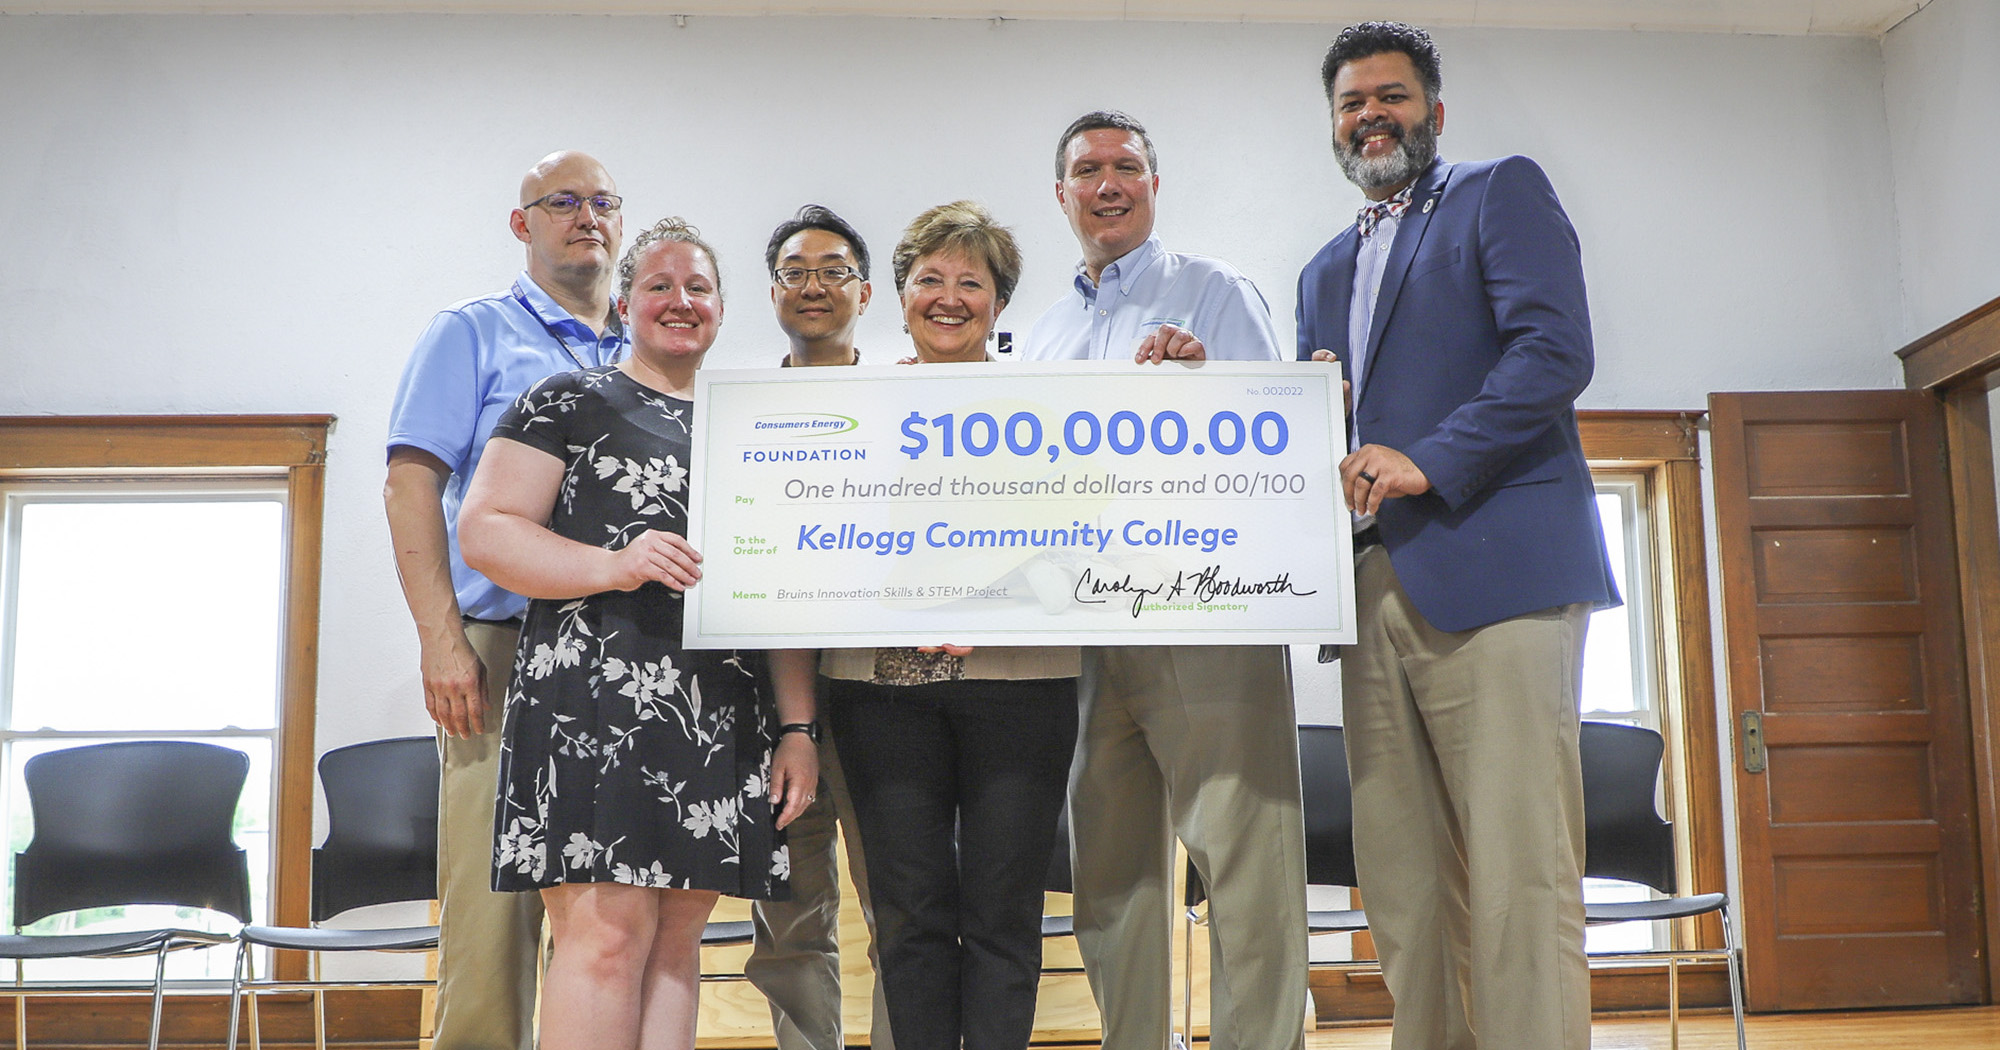 KCC, INNOVATE Albion expand youth programming through $100,000 Consumers Energy Foundation grant